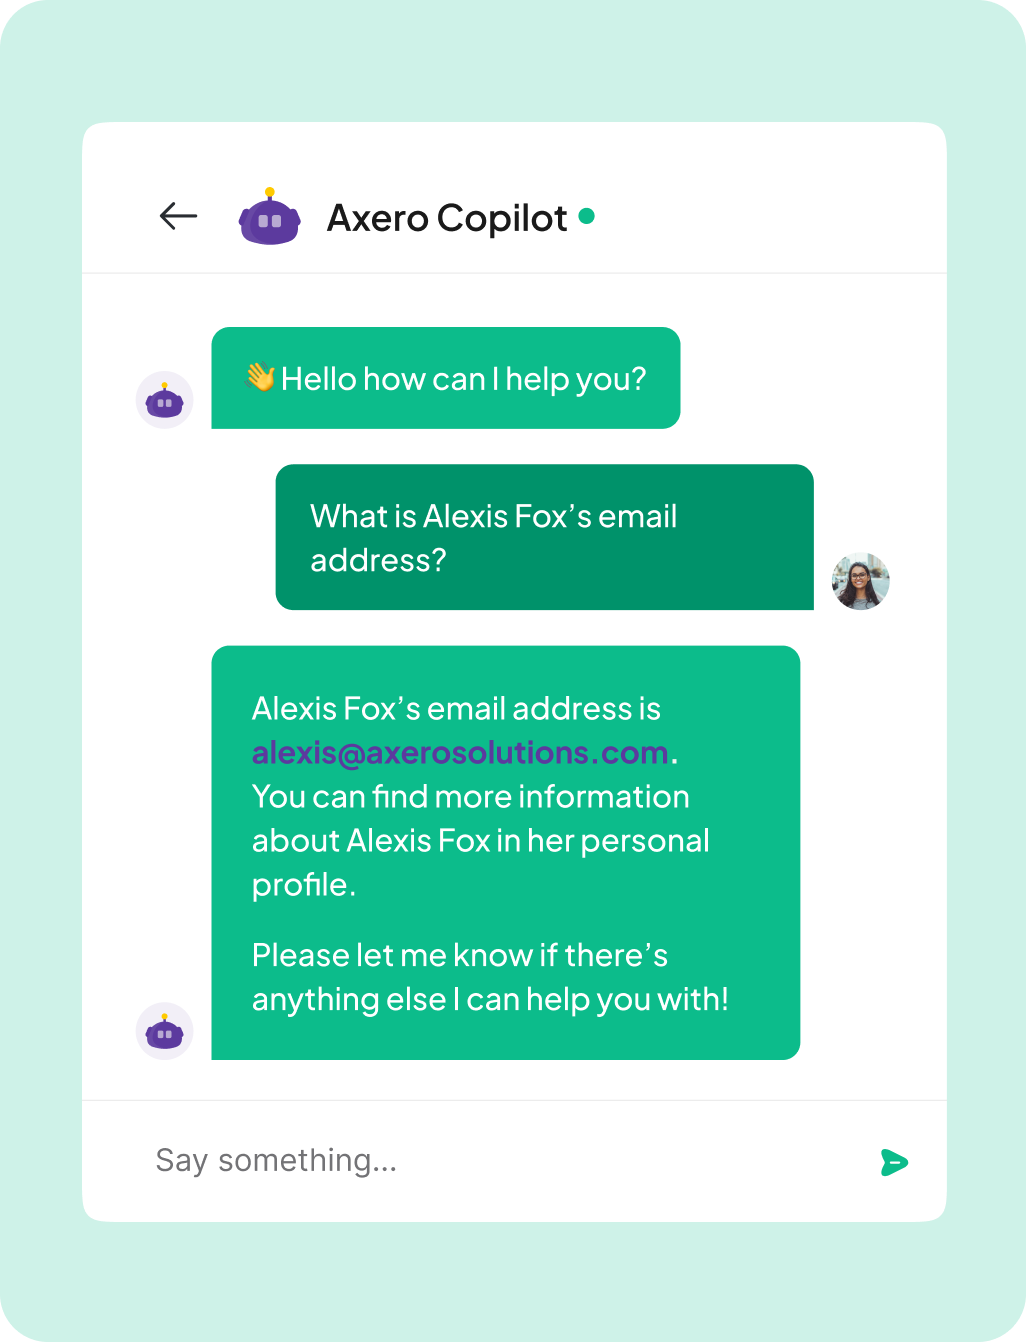 A screenshot of a chat in the axero copilot app showing a conversation where a user asks for alexis fox's email, and the assistant responds with the email address and offers further help.